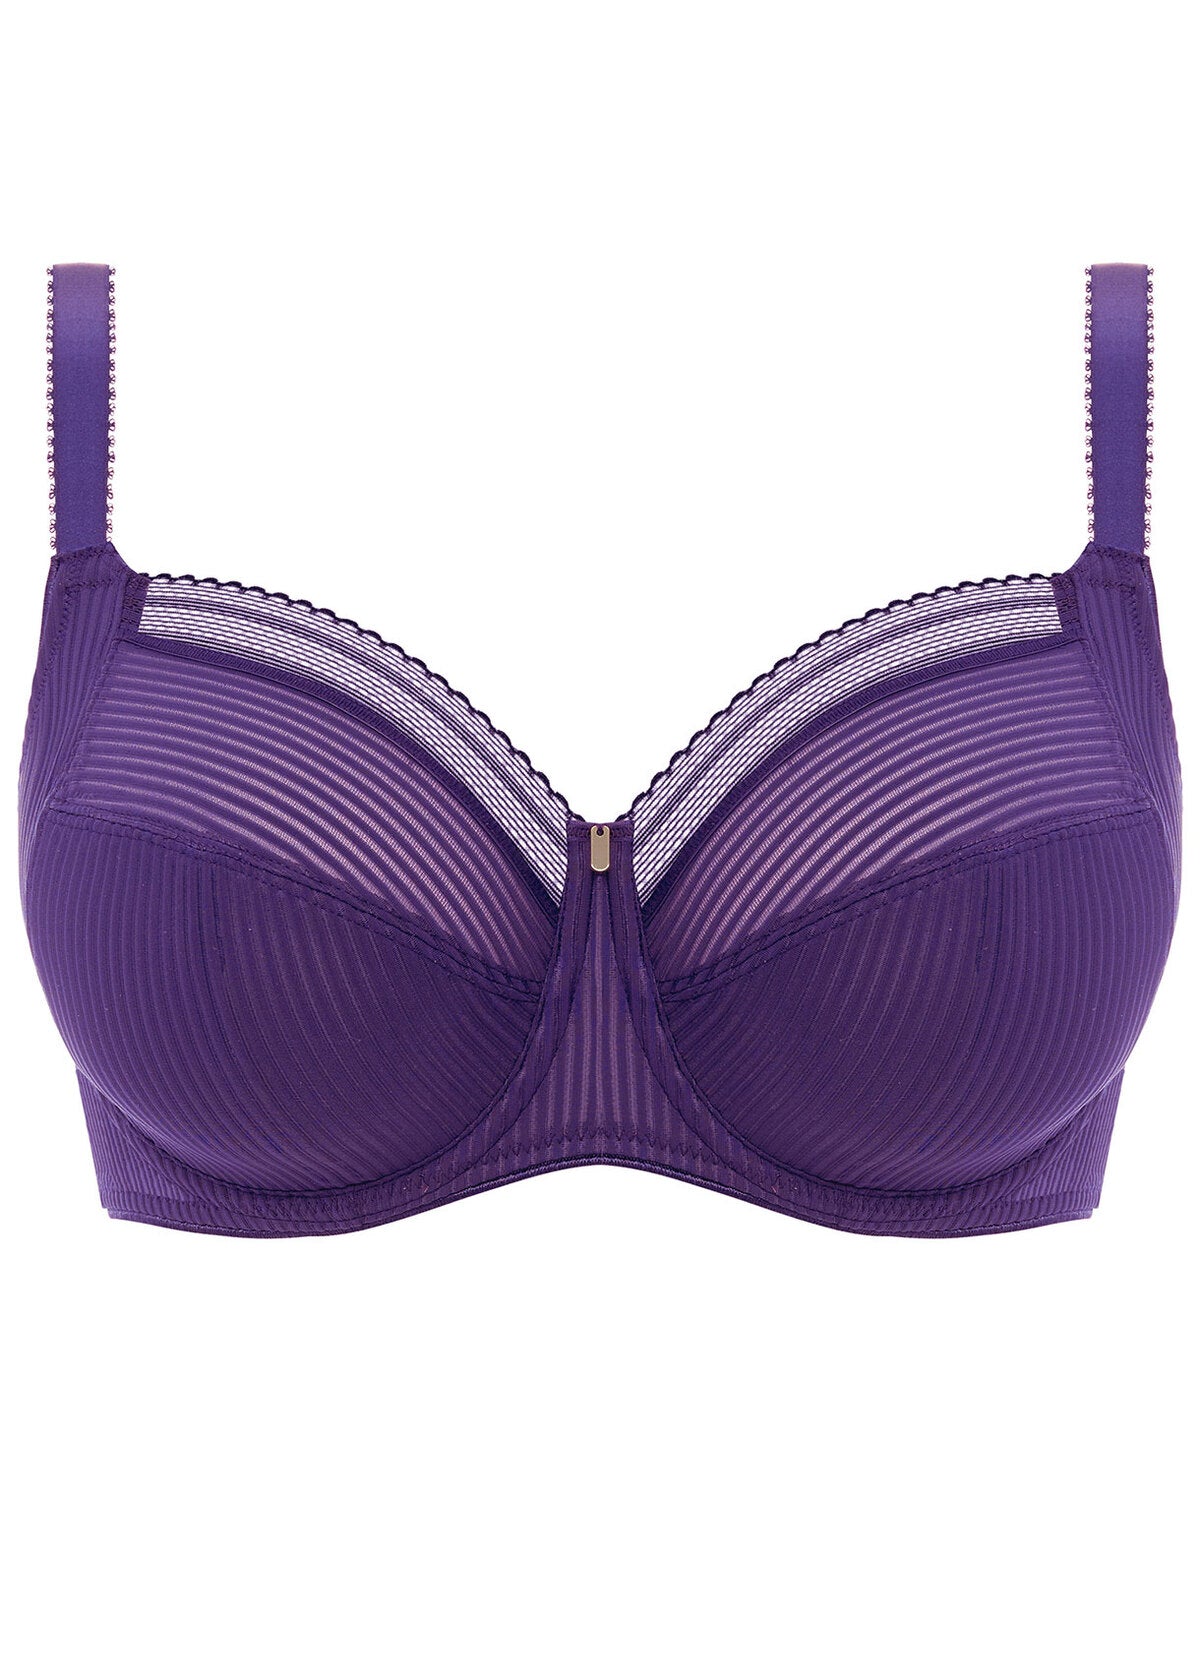 Fantasie Fusion Full Cup Side Support Bra: Black: 32F